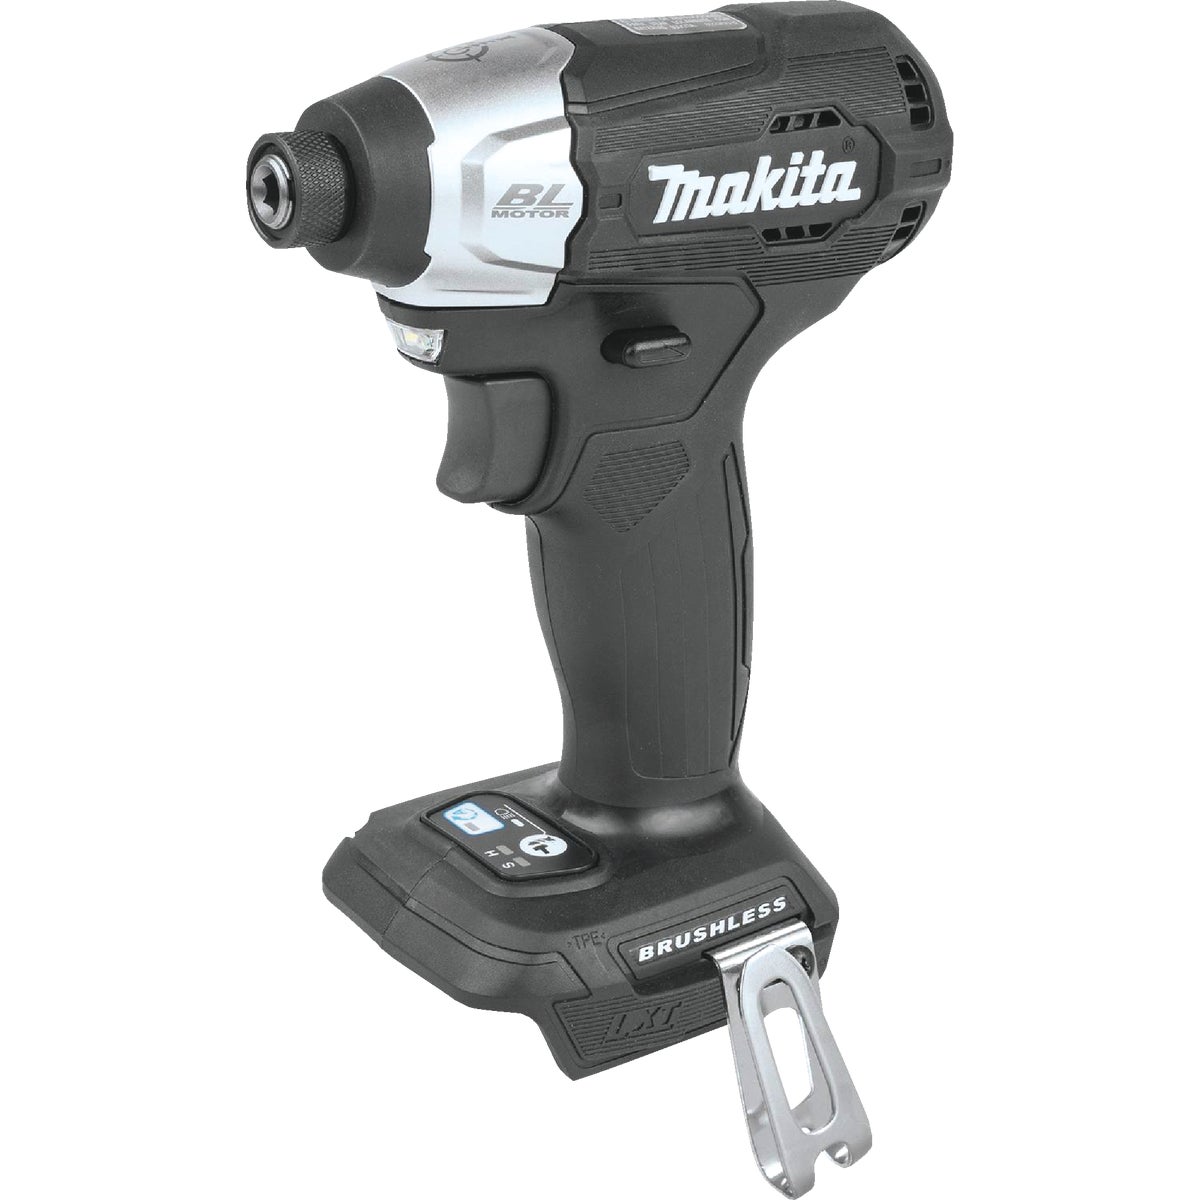 Makita 18-Volt LXT Lithium-Ion Brushless 1/4 In. Hex Sub-Compact Cordless Impact Driver (Tool Only)